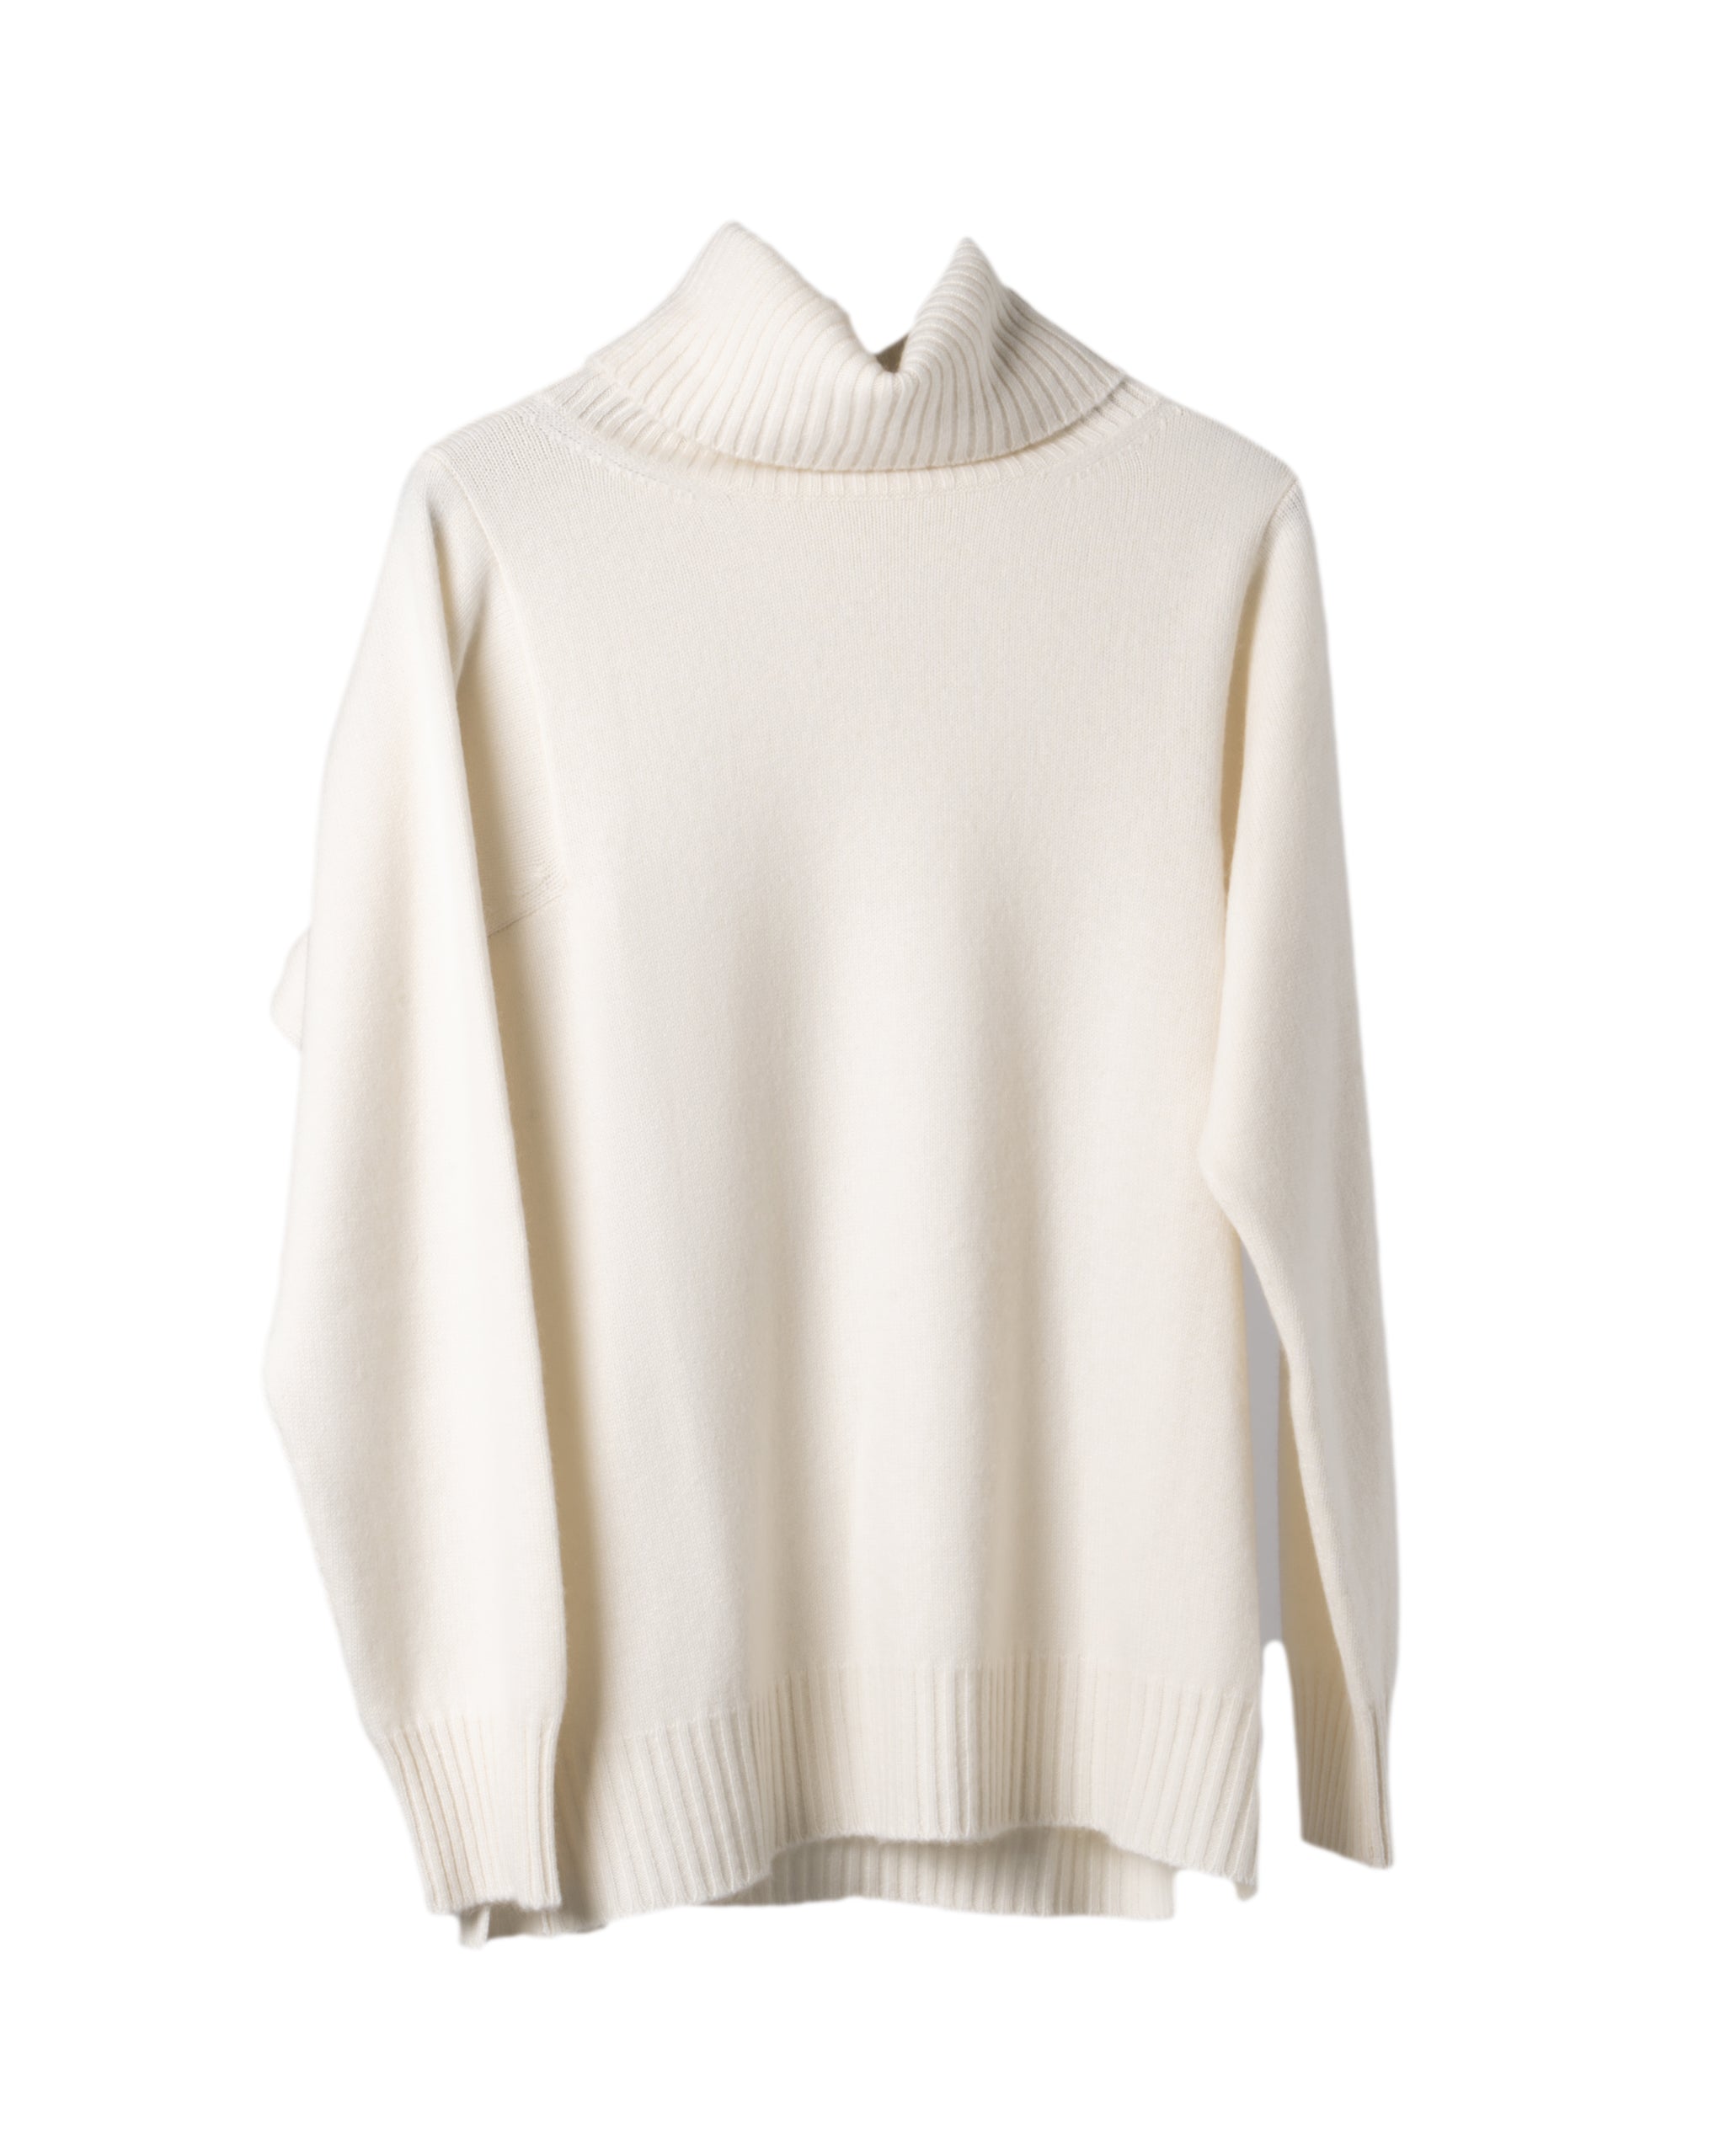 6PLY CASHMERE FISHERMAN JUMPER